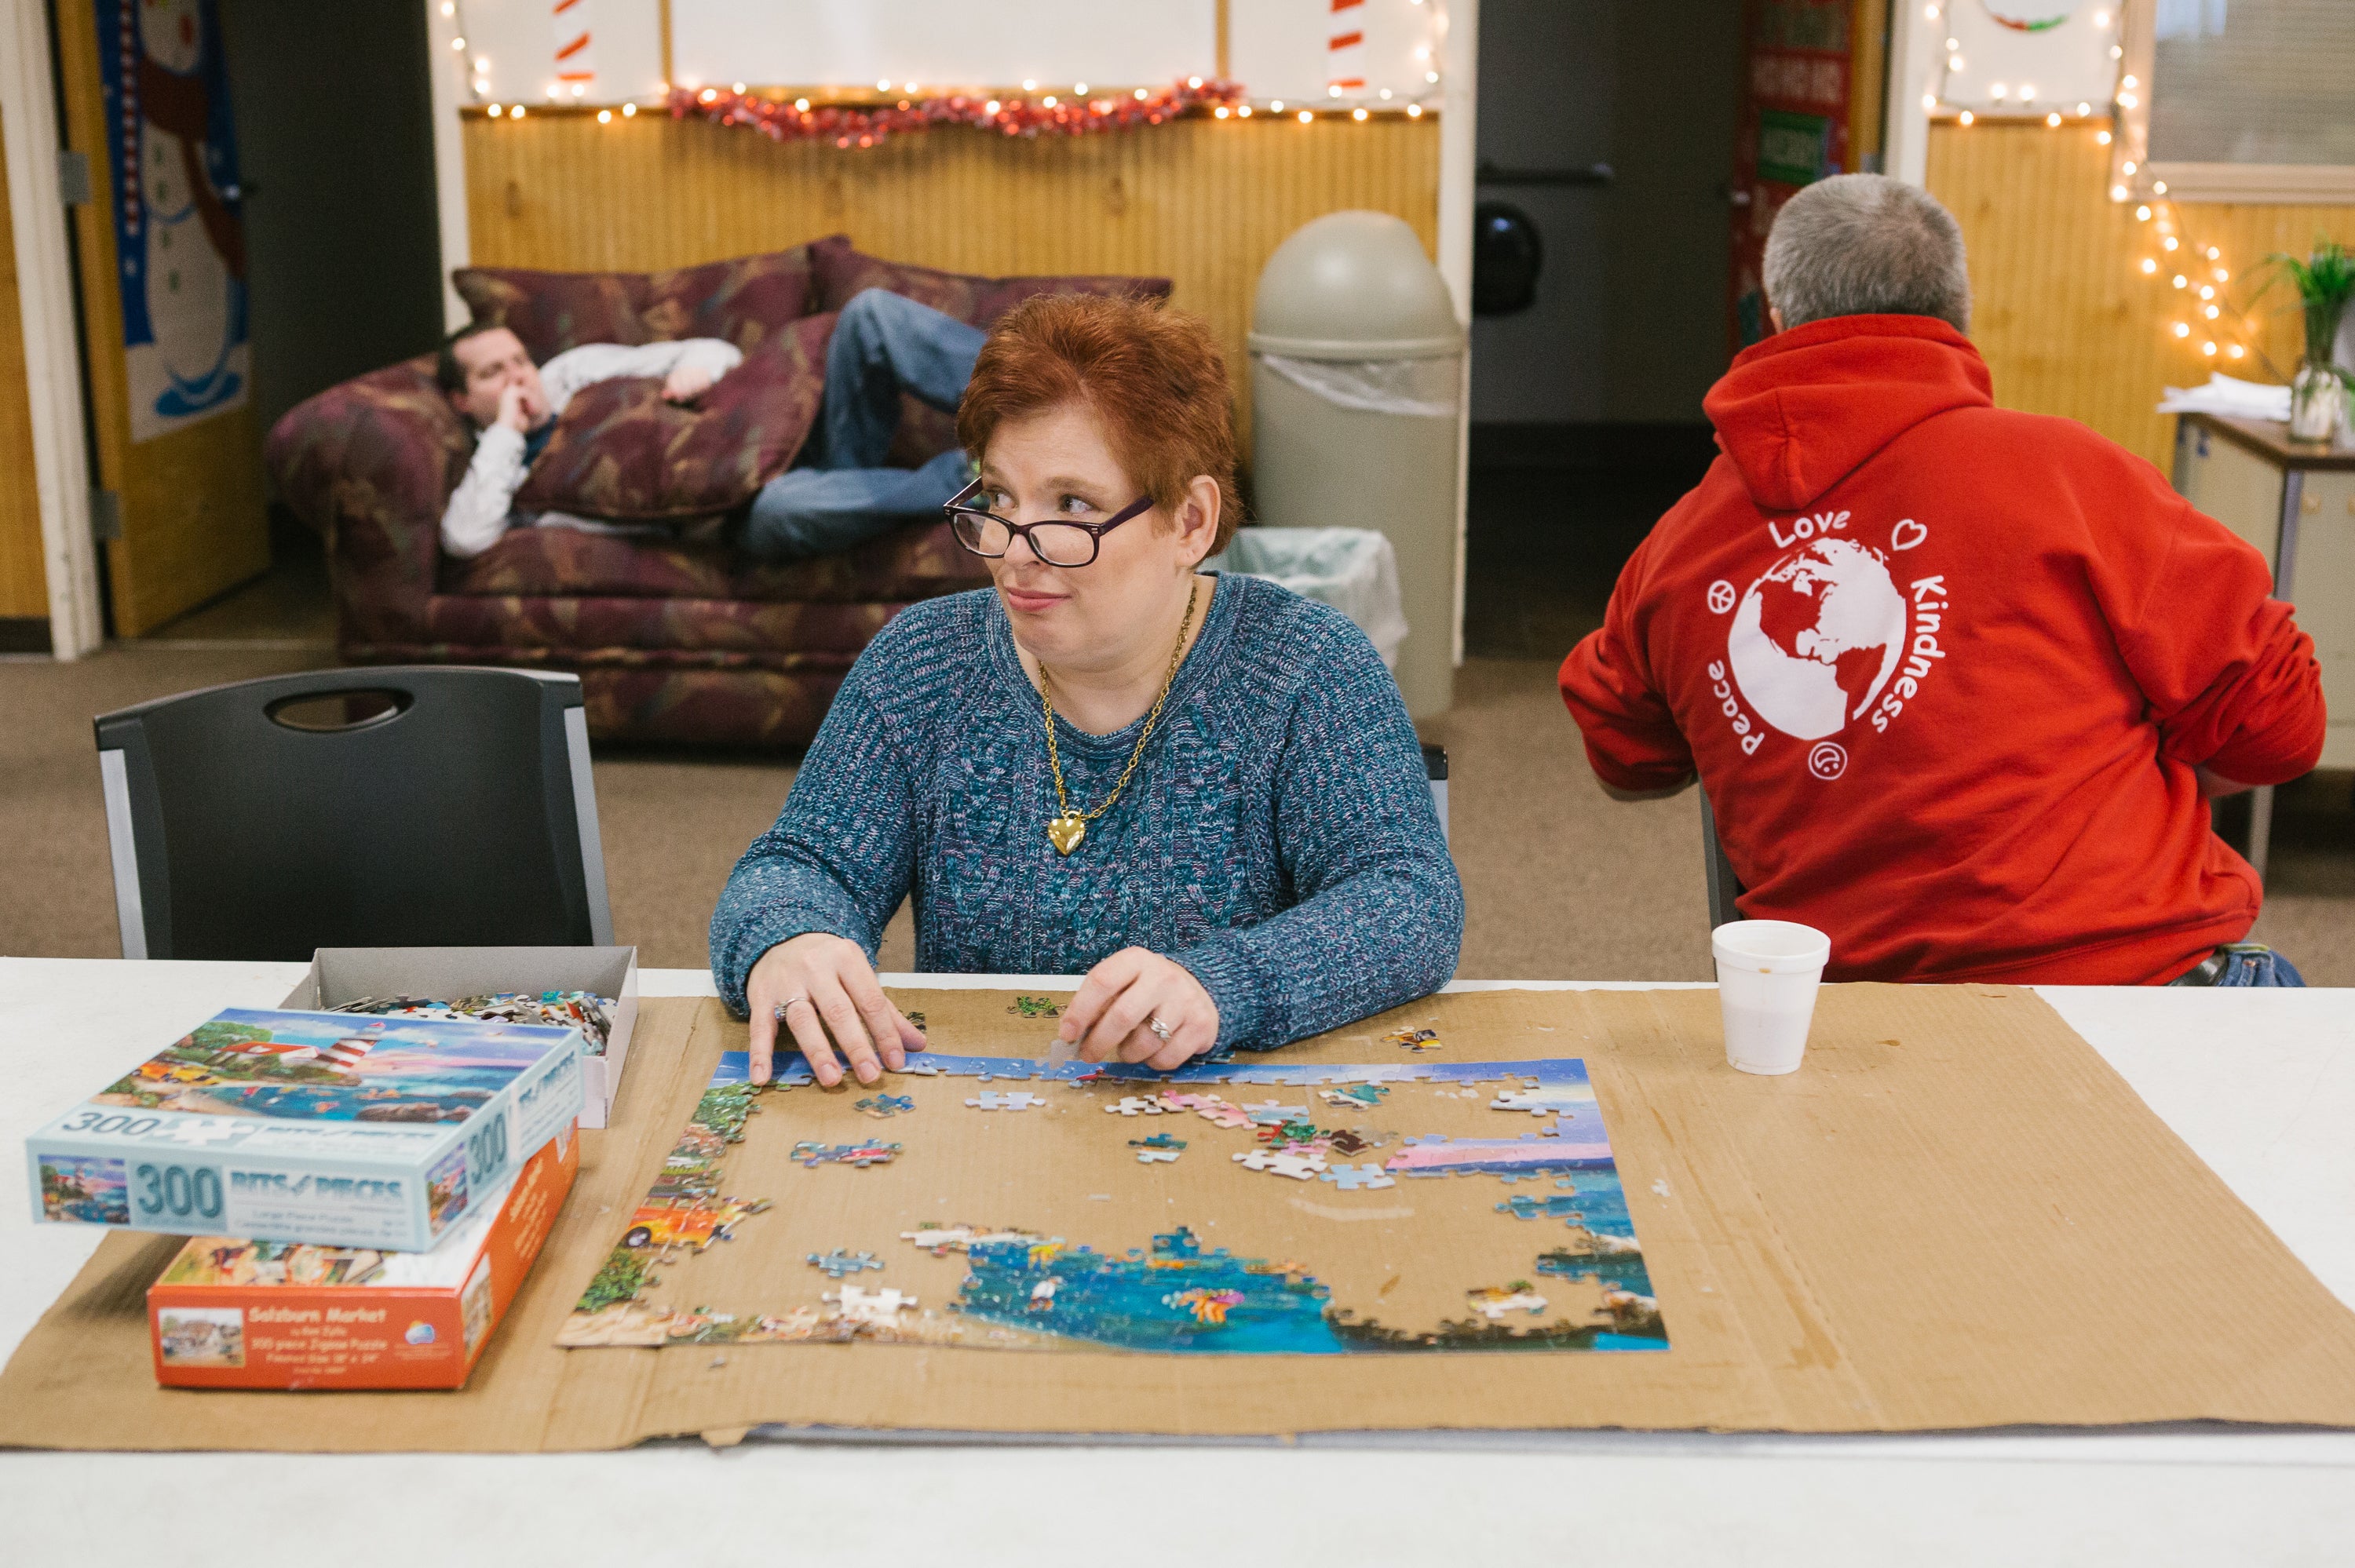 Pauline, 46, puts together a puzzle at her day program. Adults with intellectual disabilities are among groups with one of the highest rates of sexual assault in the United States, according to previously unpublished sex crime data from the Justice Department.